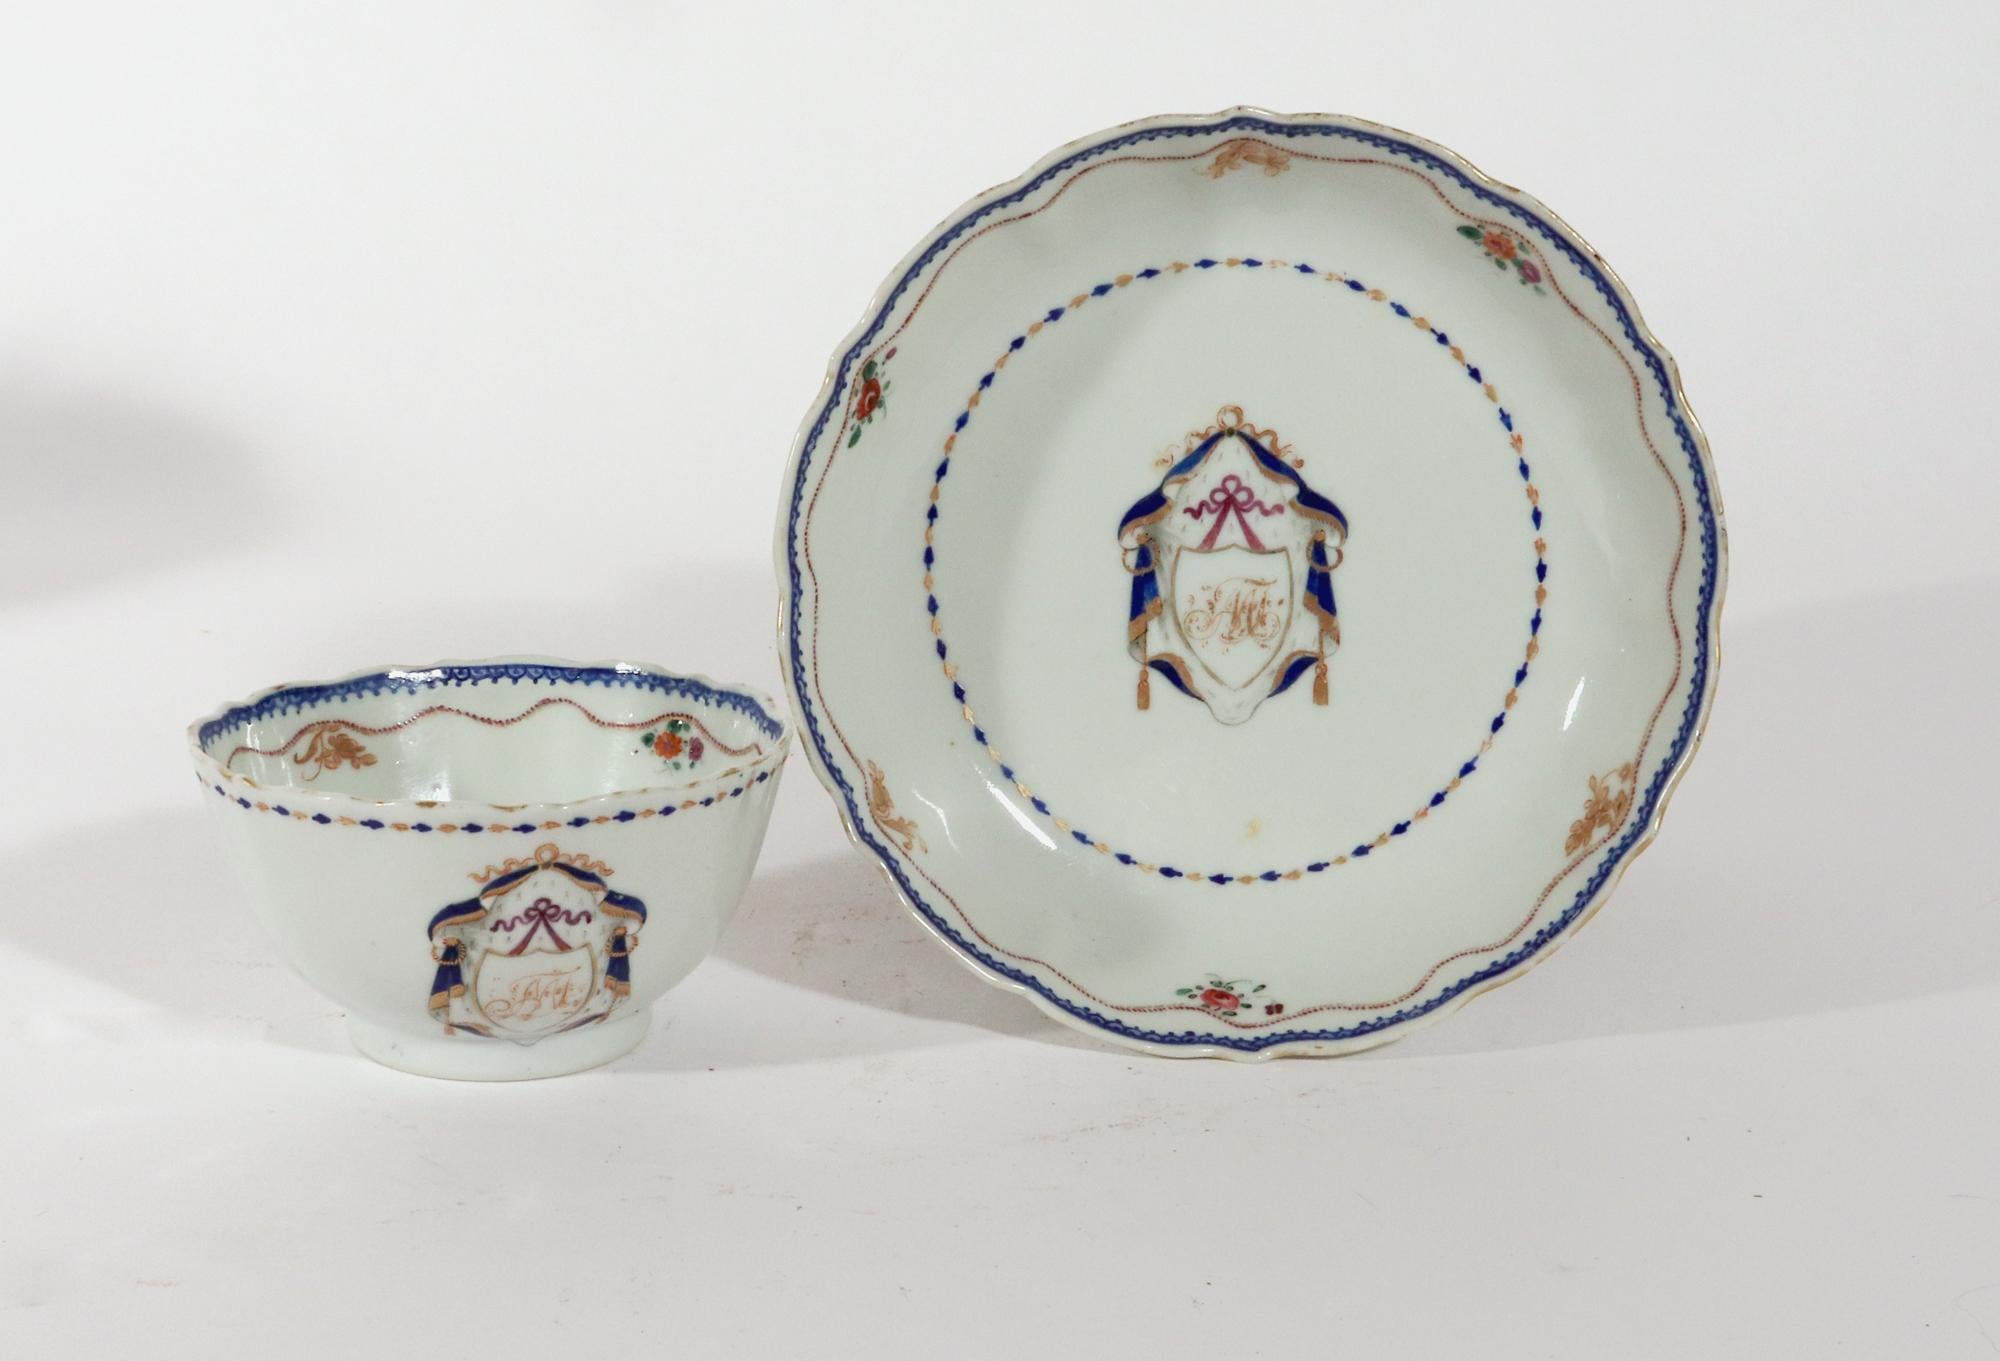 Chinese Export Porcelain Armorial Tea Bowl & Saucer
Initials MJ,
American Market,
Circa 1785

The Chinese Export porcelain large tea bowl and saucer are painted in the center of the saucer with a gold and underglaze blue design with a hanging shield